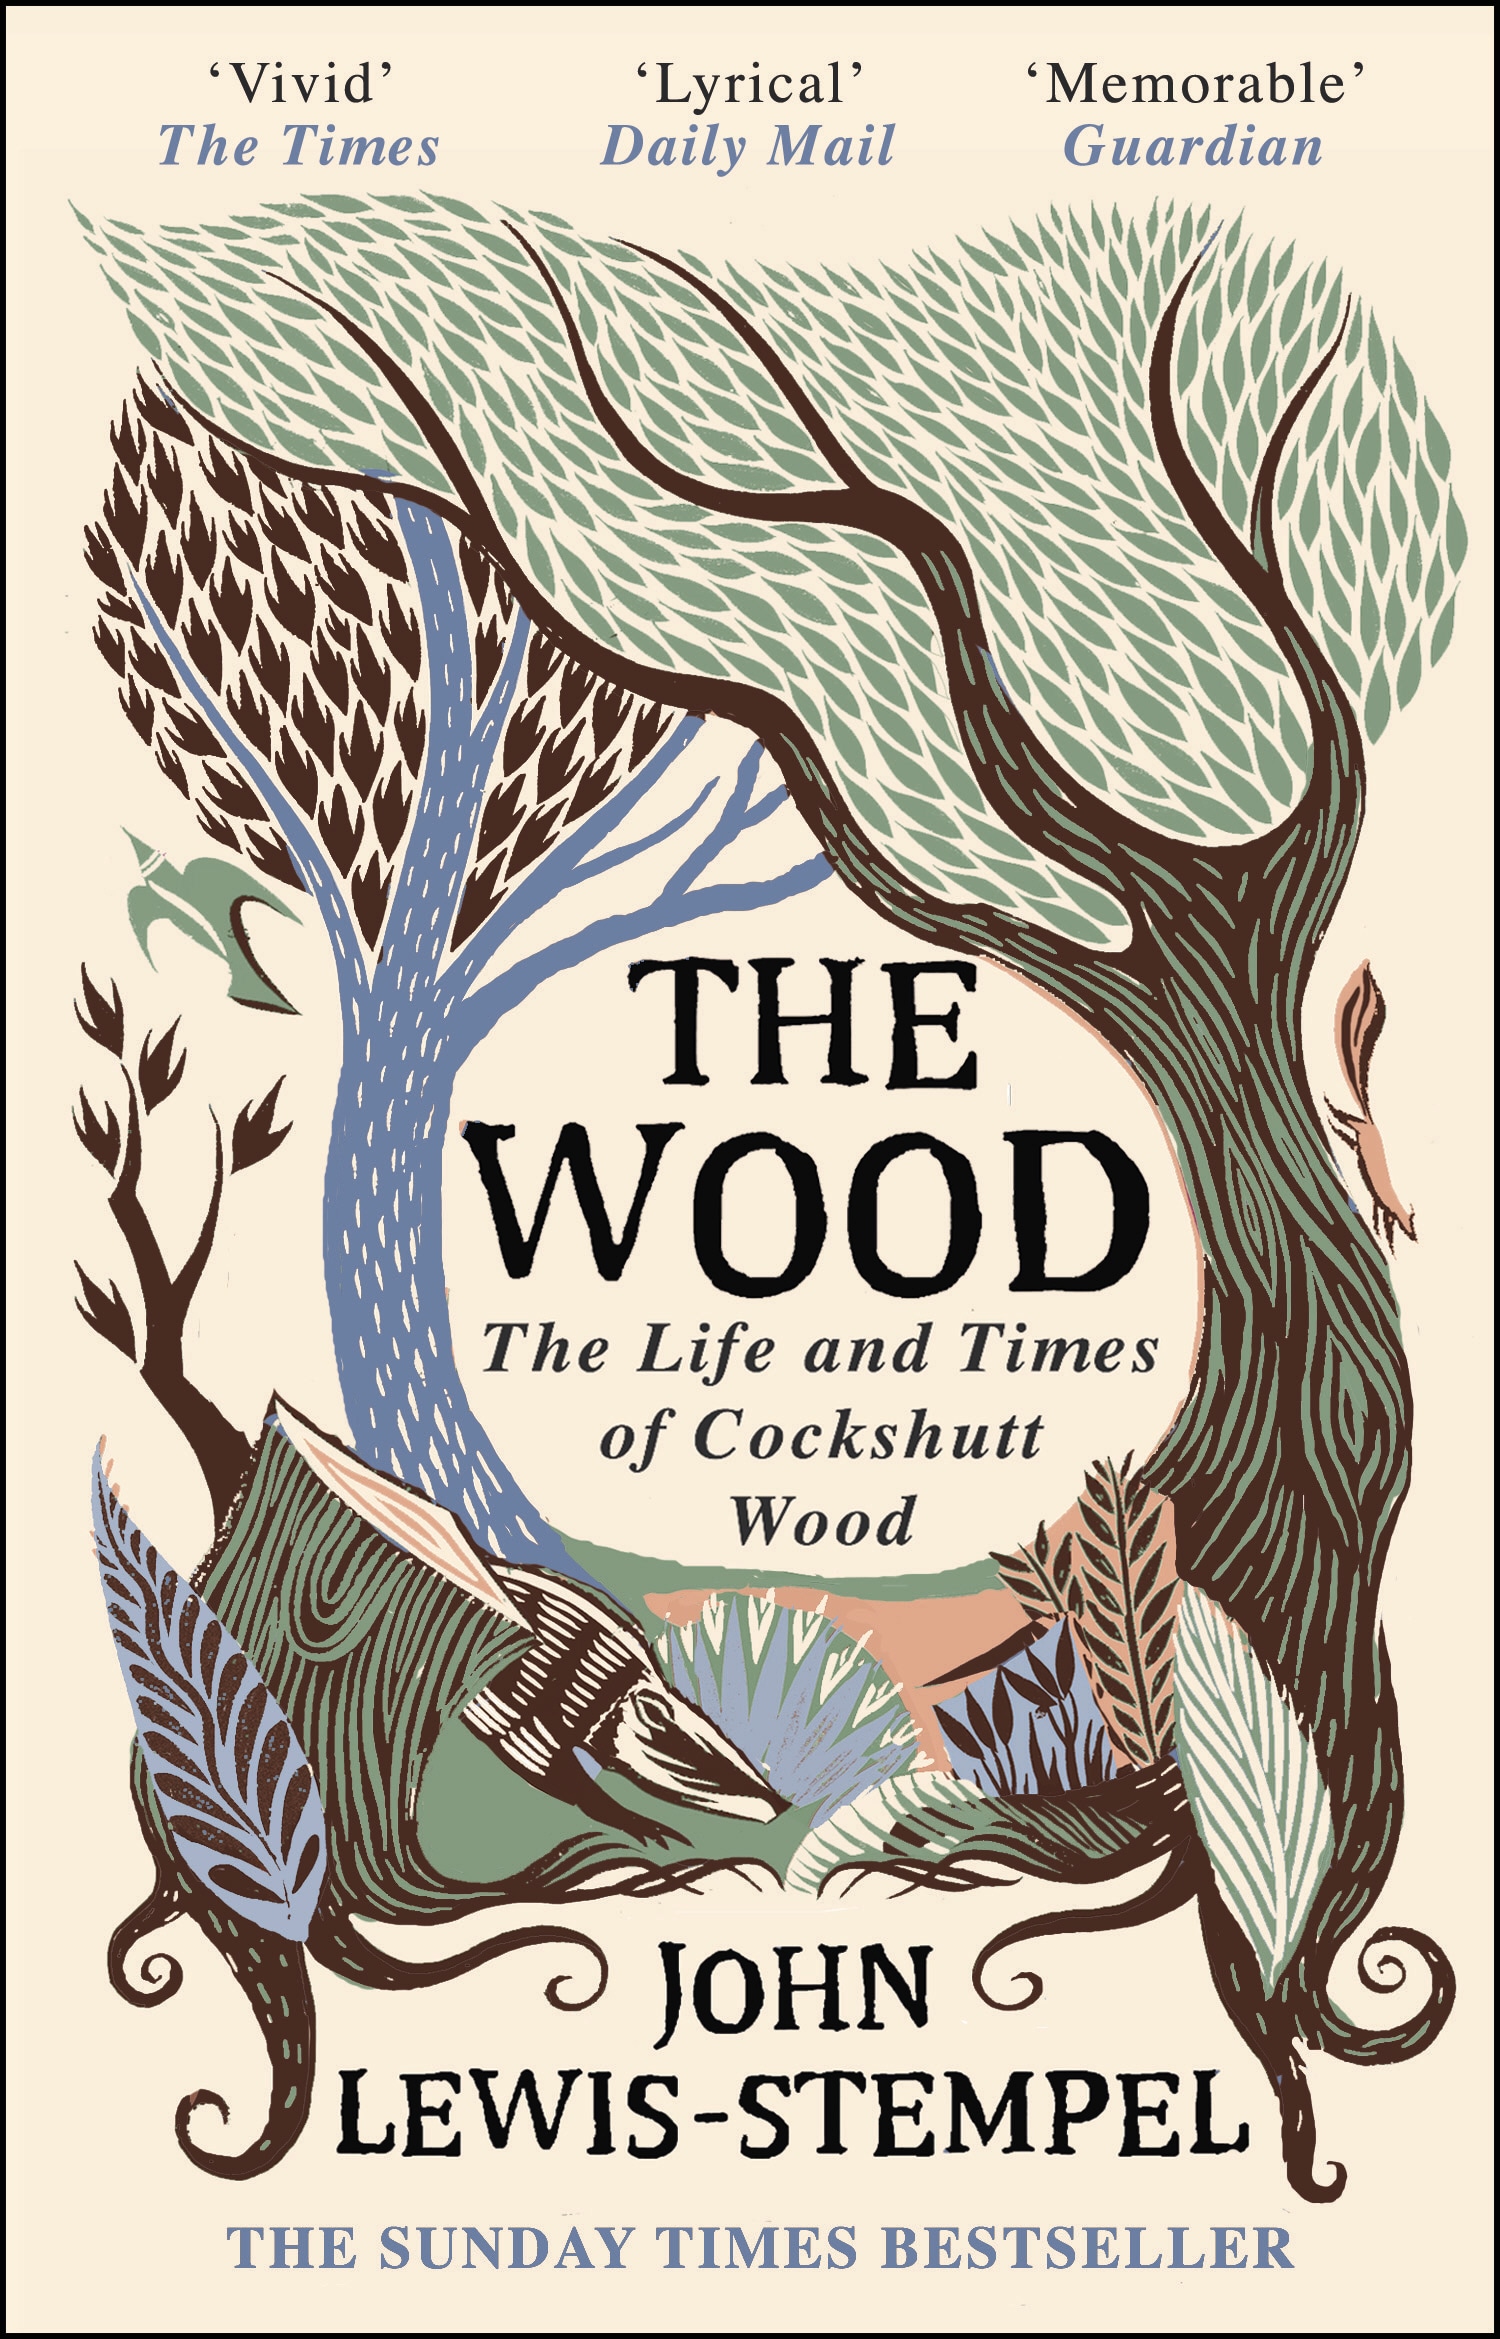 Book “The Wood” by John Lewis-Stempel — March 14, 2019